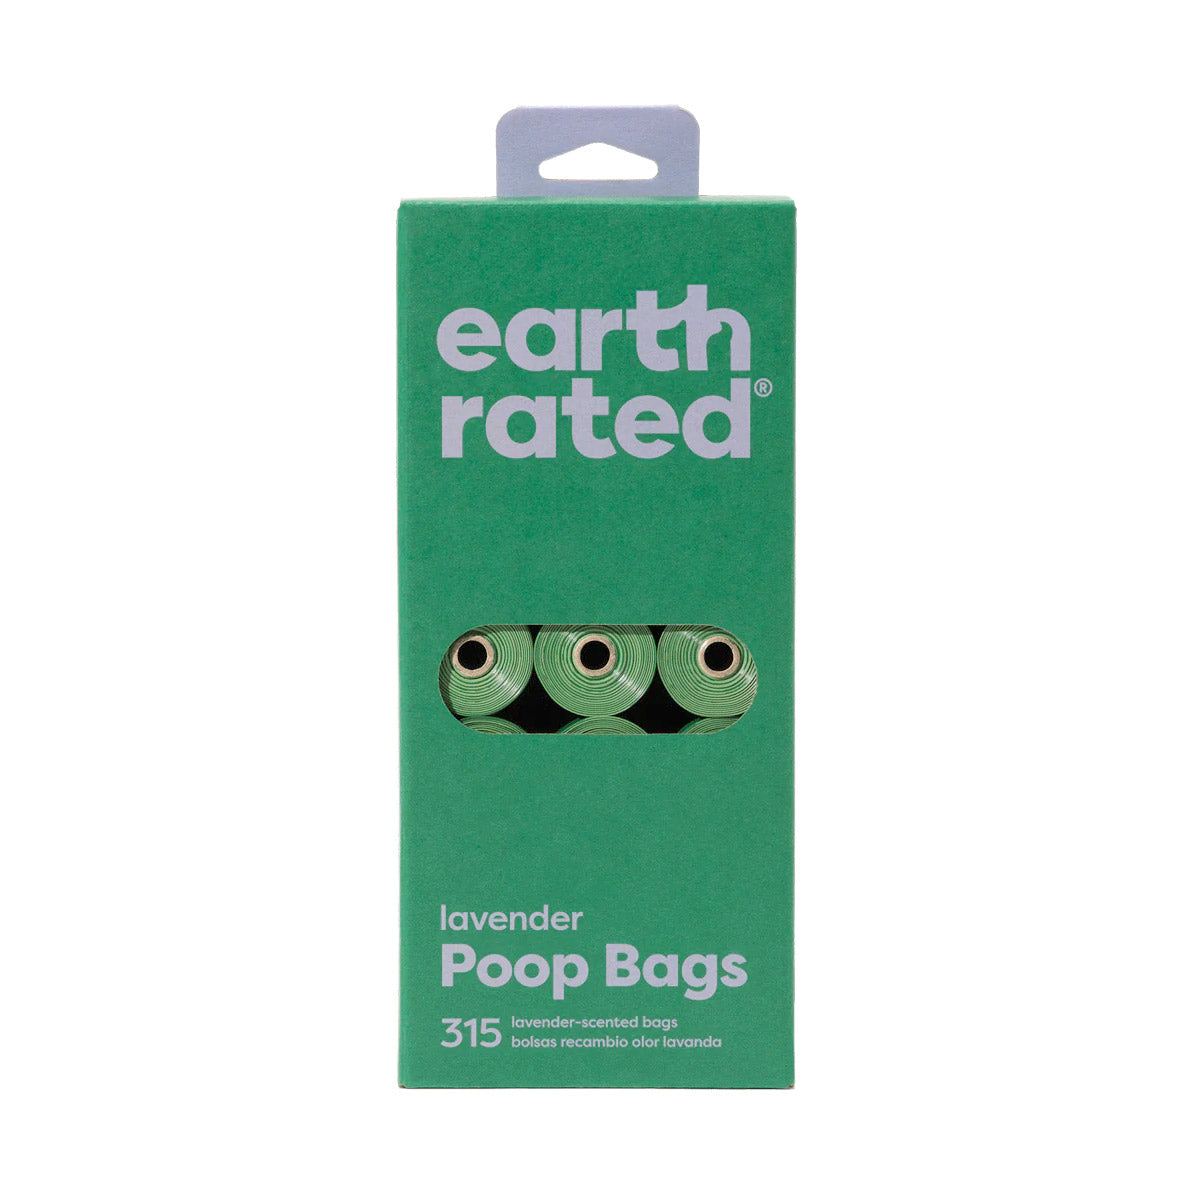 EARTH RATED Dog Poo Bags Refill Pack